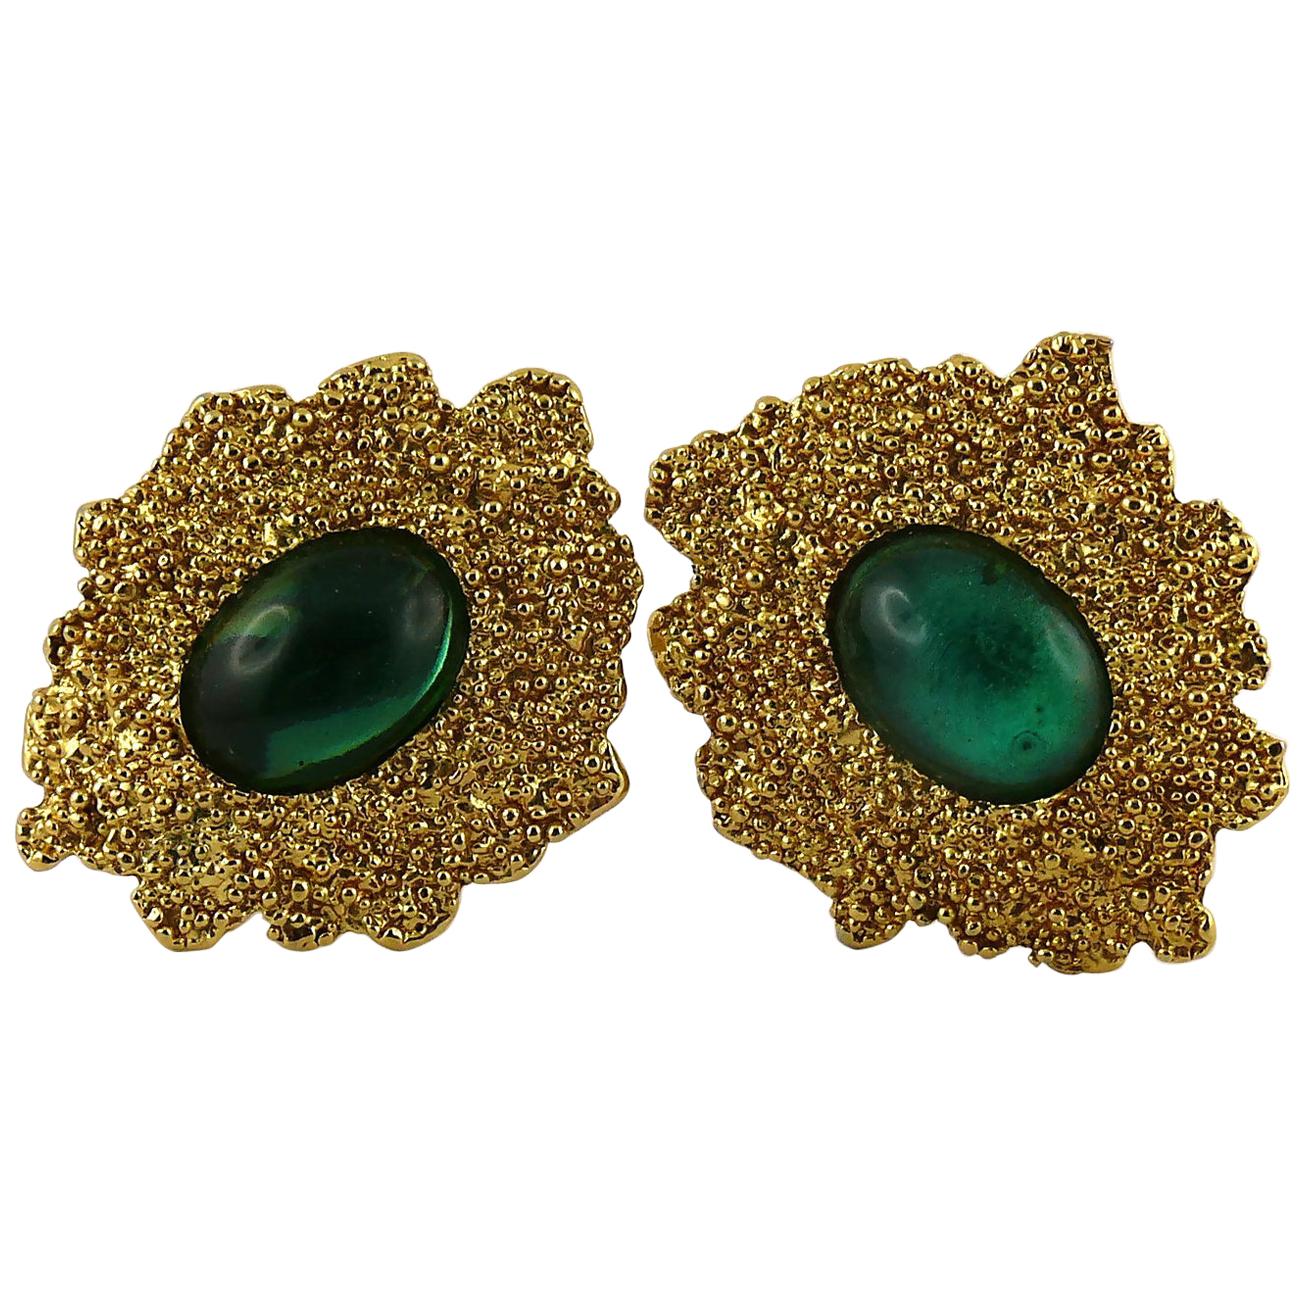 Yves Saint Laurent YSL Vintage Green Cabochon Textured Clip-On Earrings